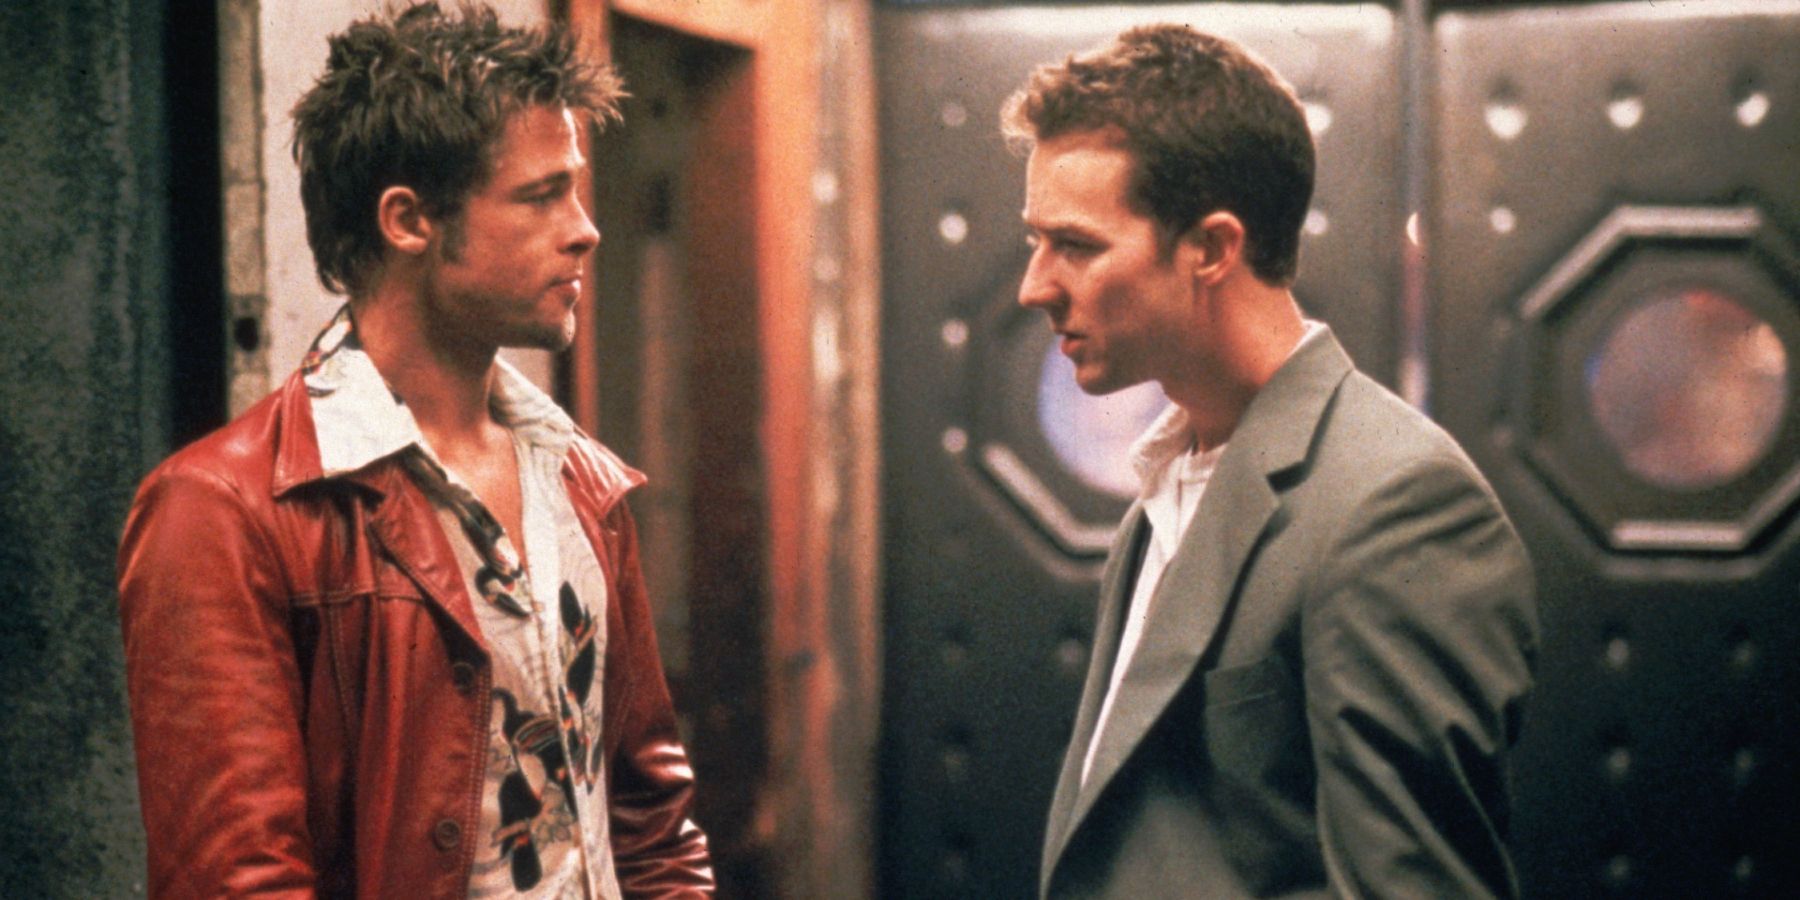 Fight Club Ending Explained: I Am Jack's Lack Of Confusion